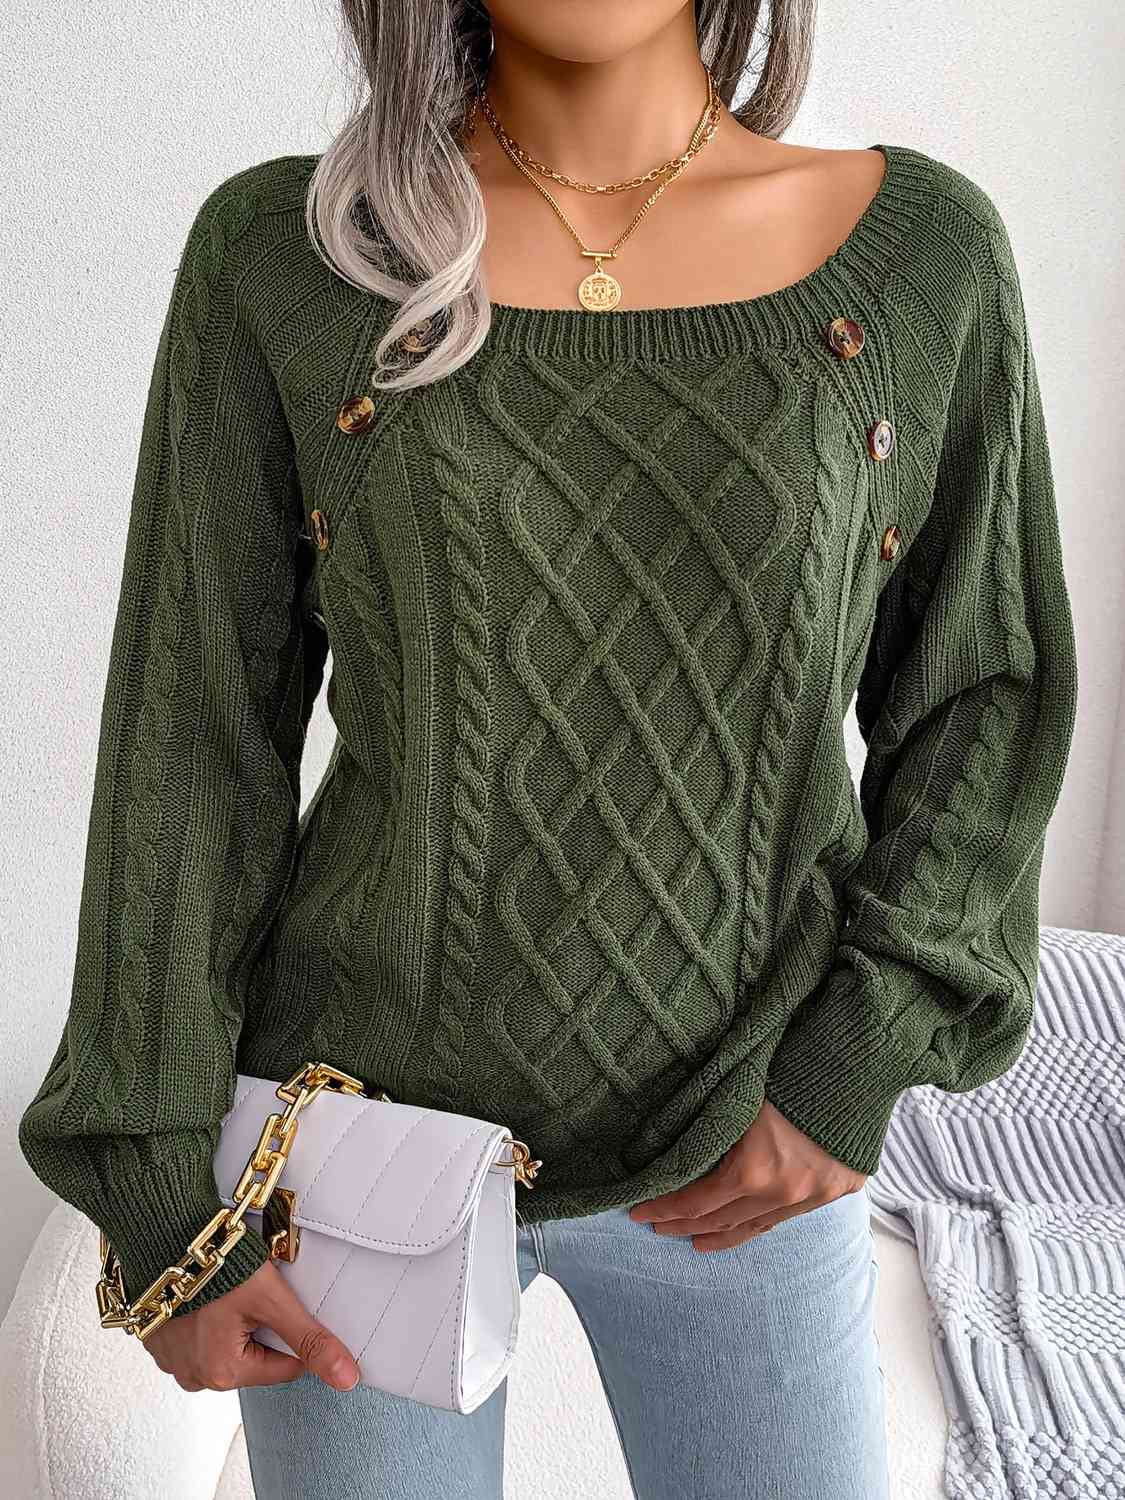 Decorative Button Cable-Knit Sweater (5 Colors) Shirts & Tops Krazy Heart Designs Boutique Army Green S 